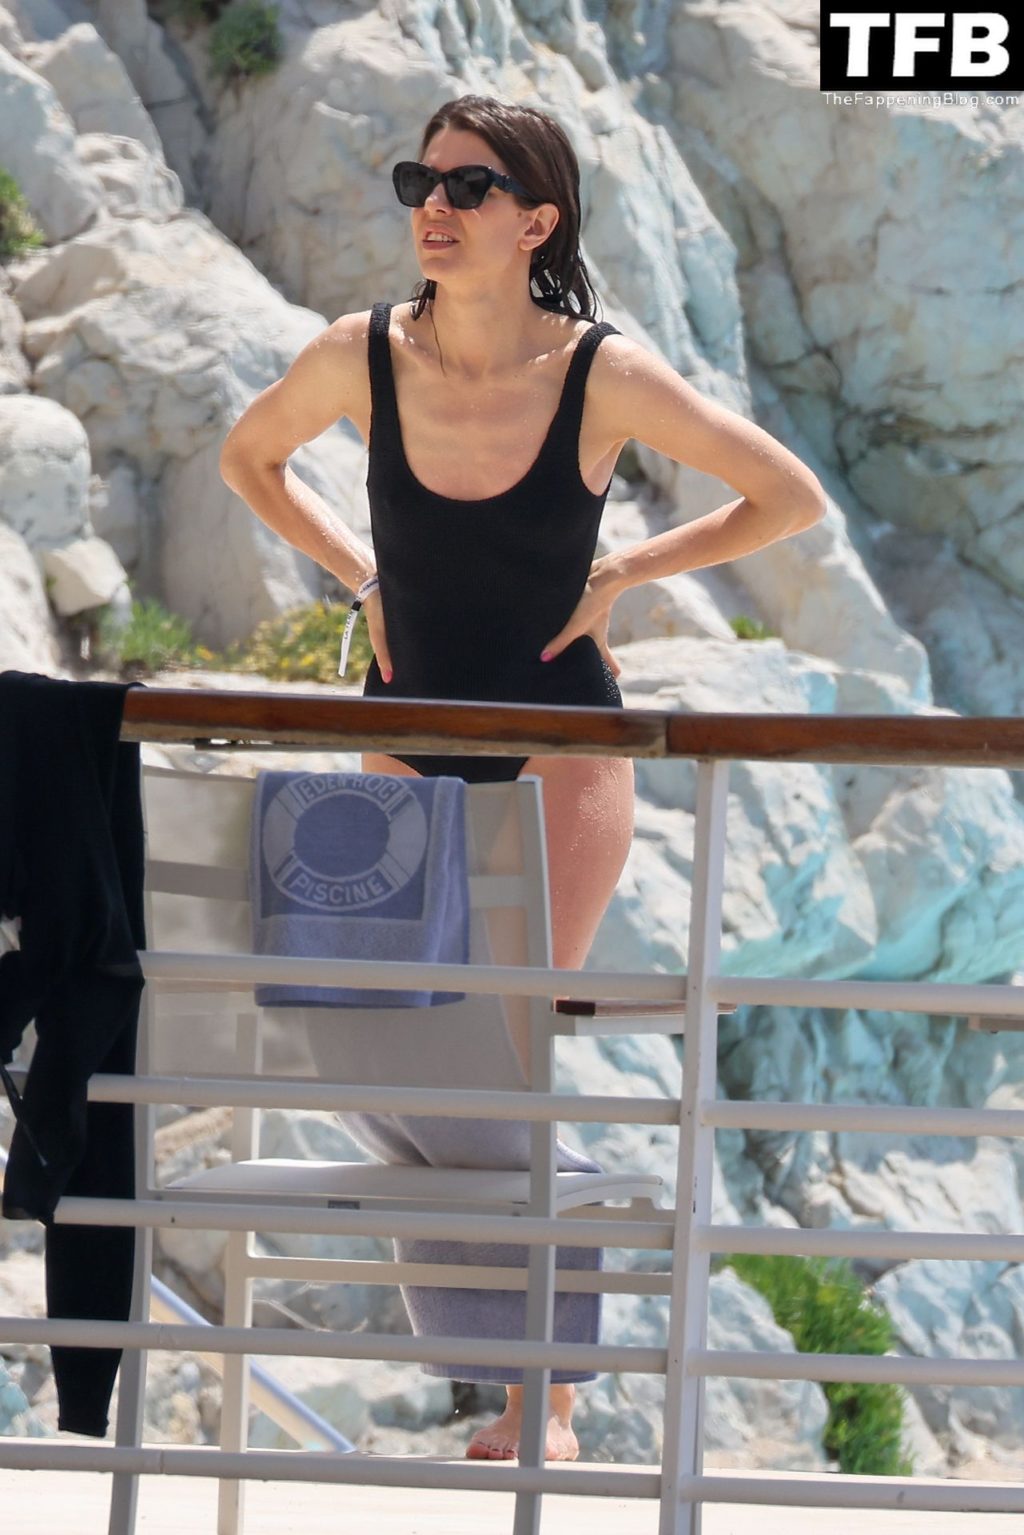 Charlotte Casiraghi Sexy The Fappening Blog 12 1024x1535 - Charlotte Casiraghi is Seen in a Black Swimsuit at Eden Roc Hotel (69 Photos)